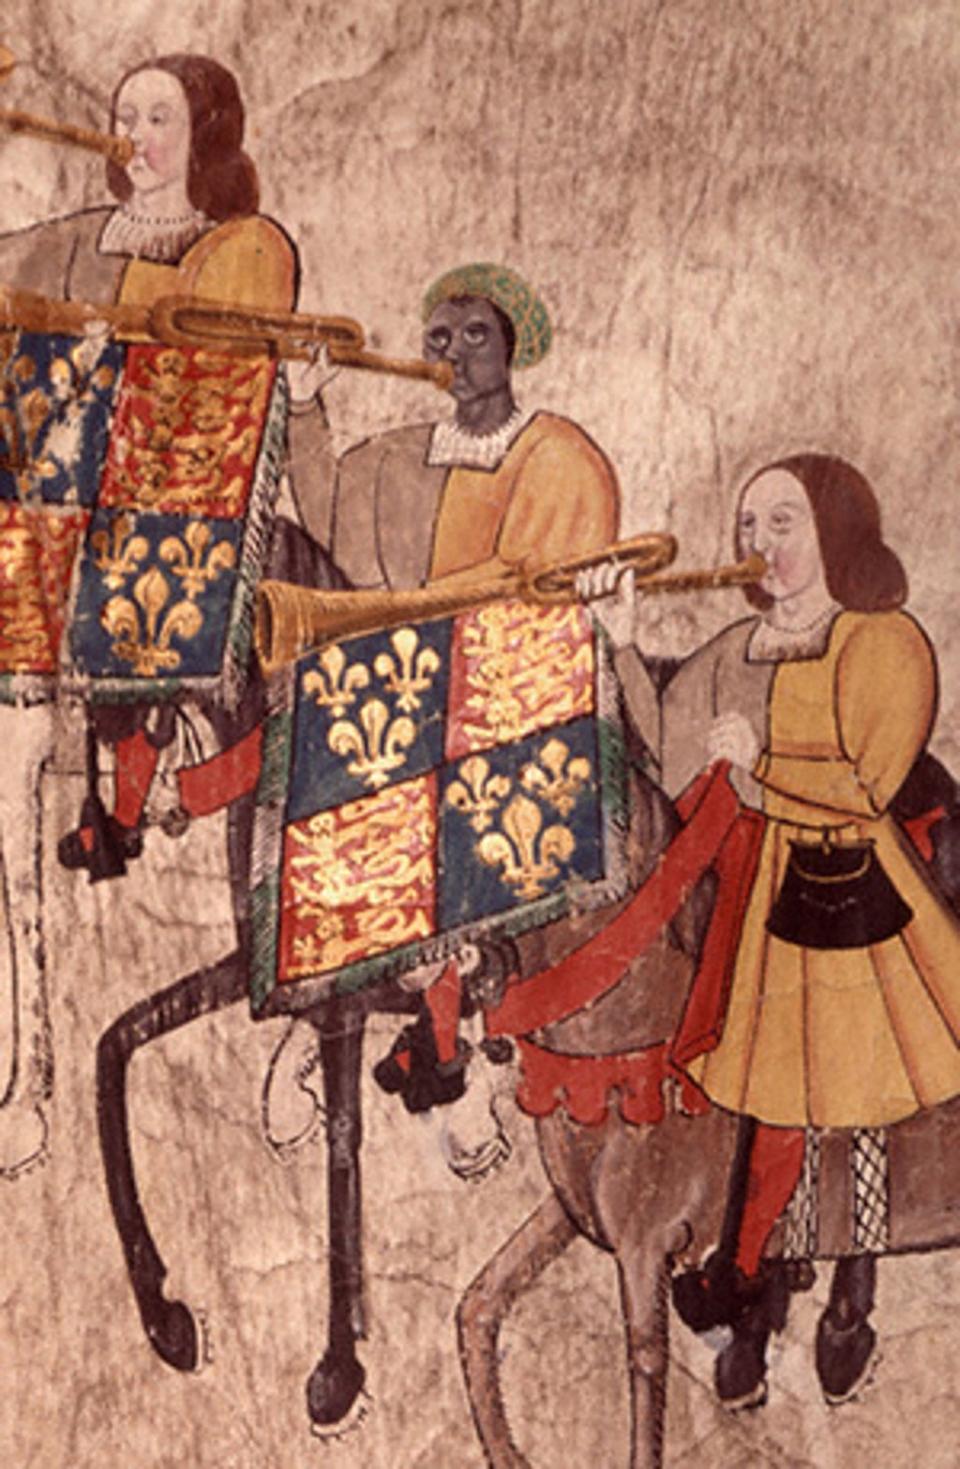 Extract from the Westminster Tournament Roll showing John Blanke, the only figure wearing an orange turban latticed with yellow (Westminster Tournament Roll)